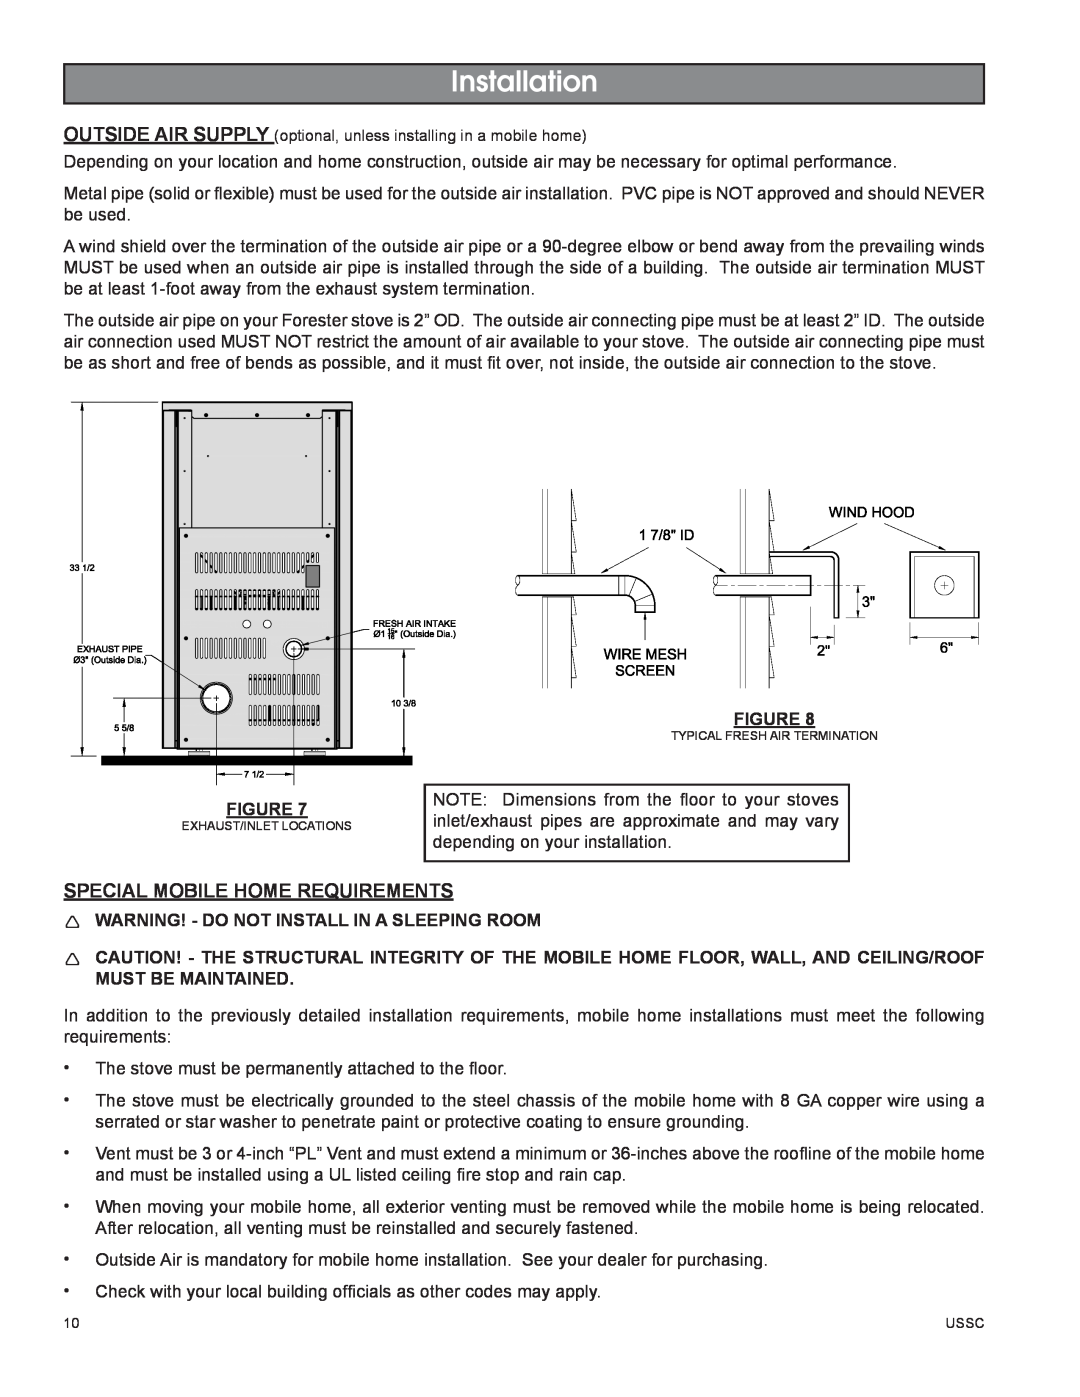 United States Stove 58242 Installation, Special Mobile Home Requirements, Warning! - Do Not Install In A Sleeping Room 